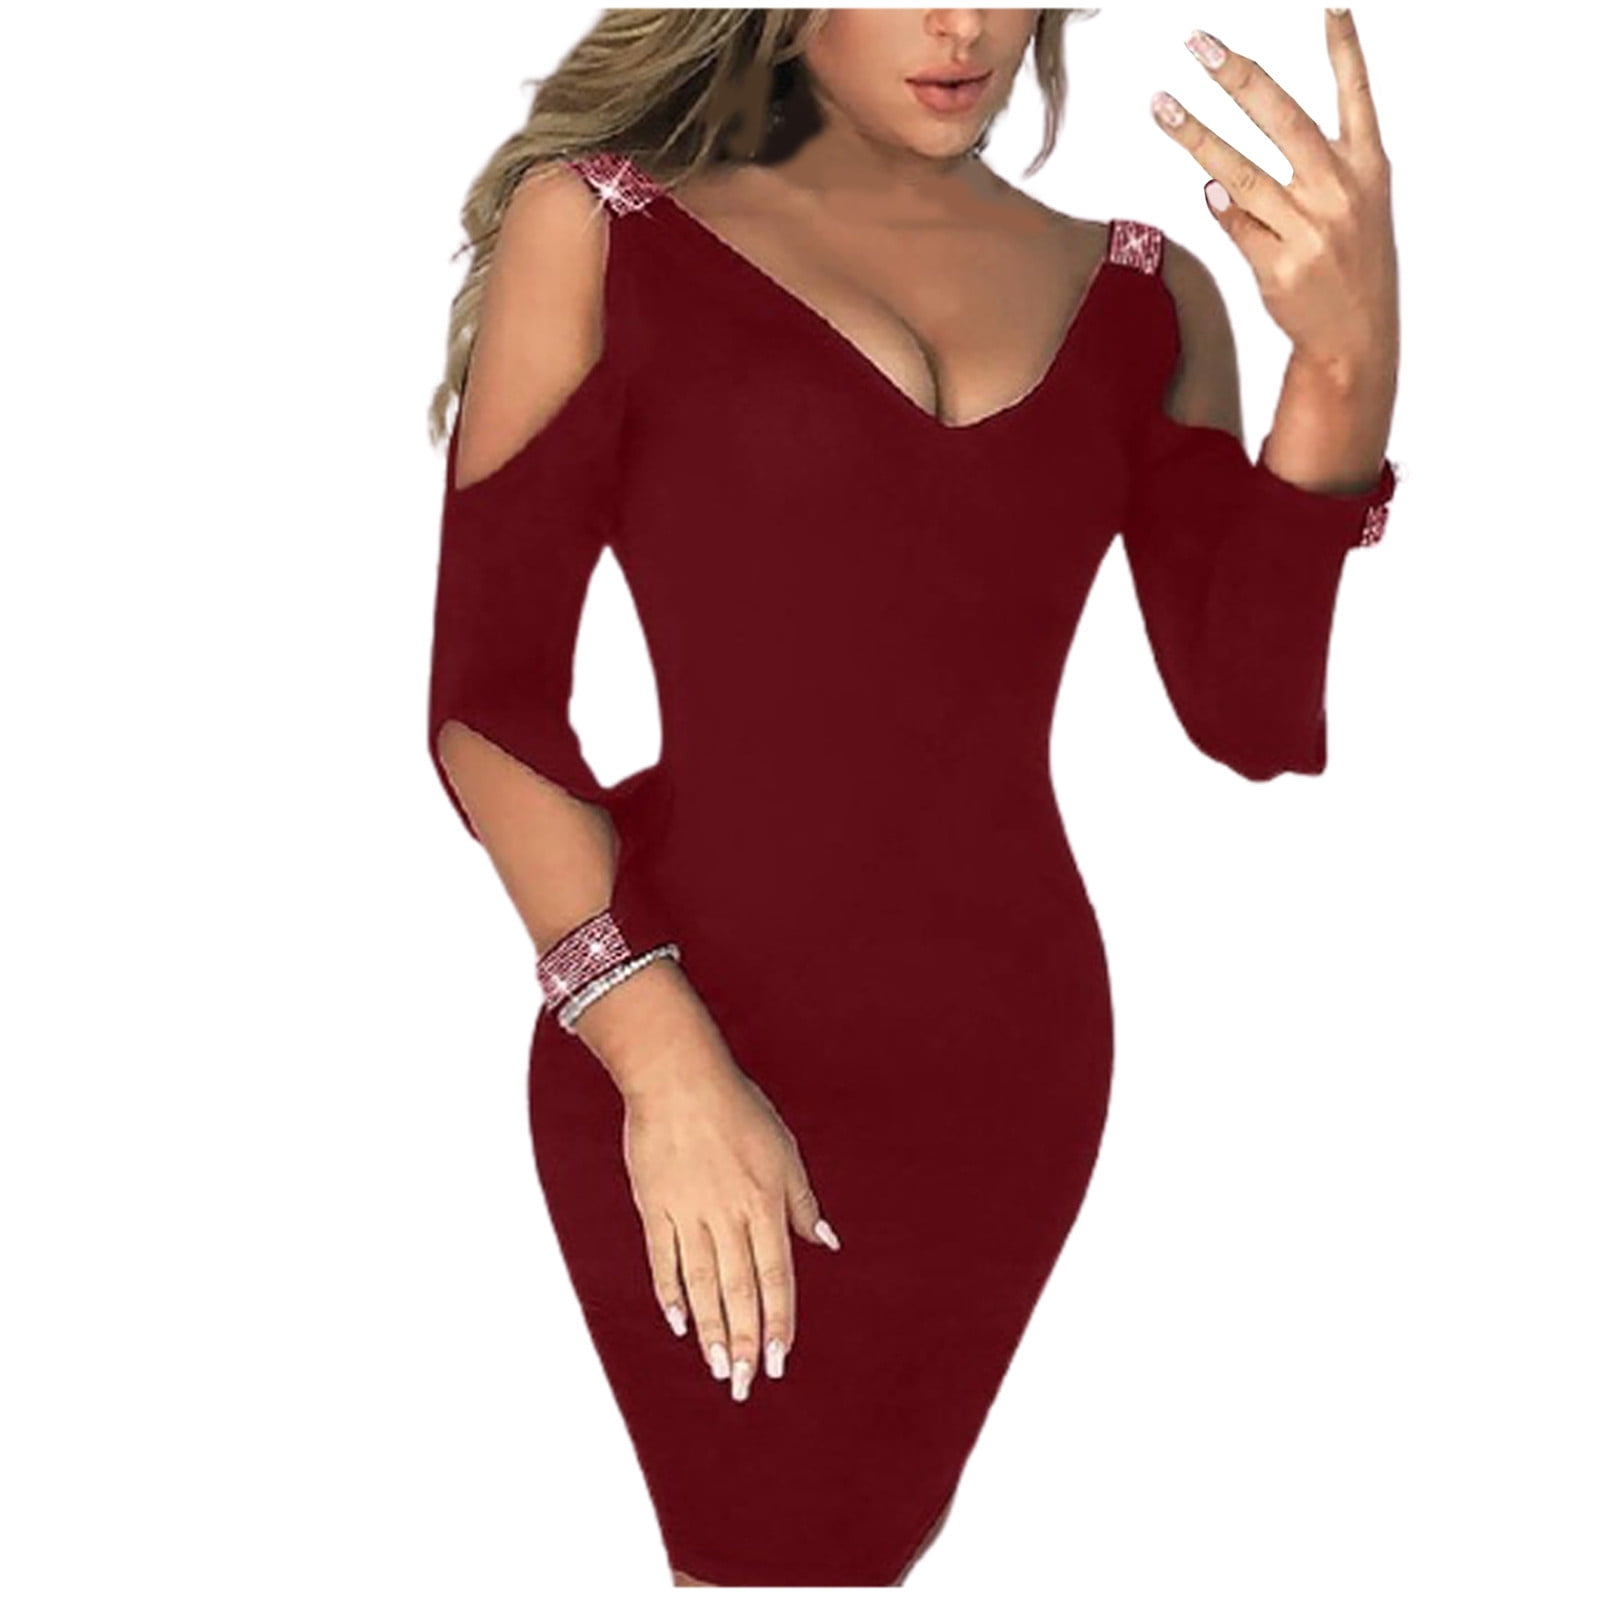 Lopecy-Sta Fashion Women Casual Sexy V-Neck Solid Dresses Summer Long  Sleeve Pullover Bandage Dress Savings Clearance Long Sleeve Dress for Women  Sundresses for Women White 